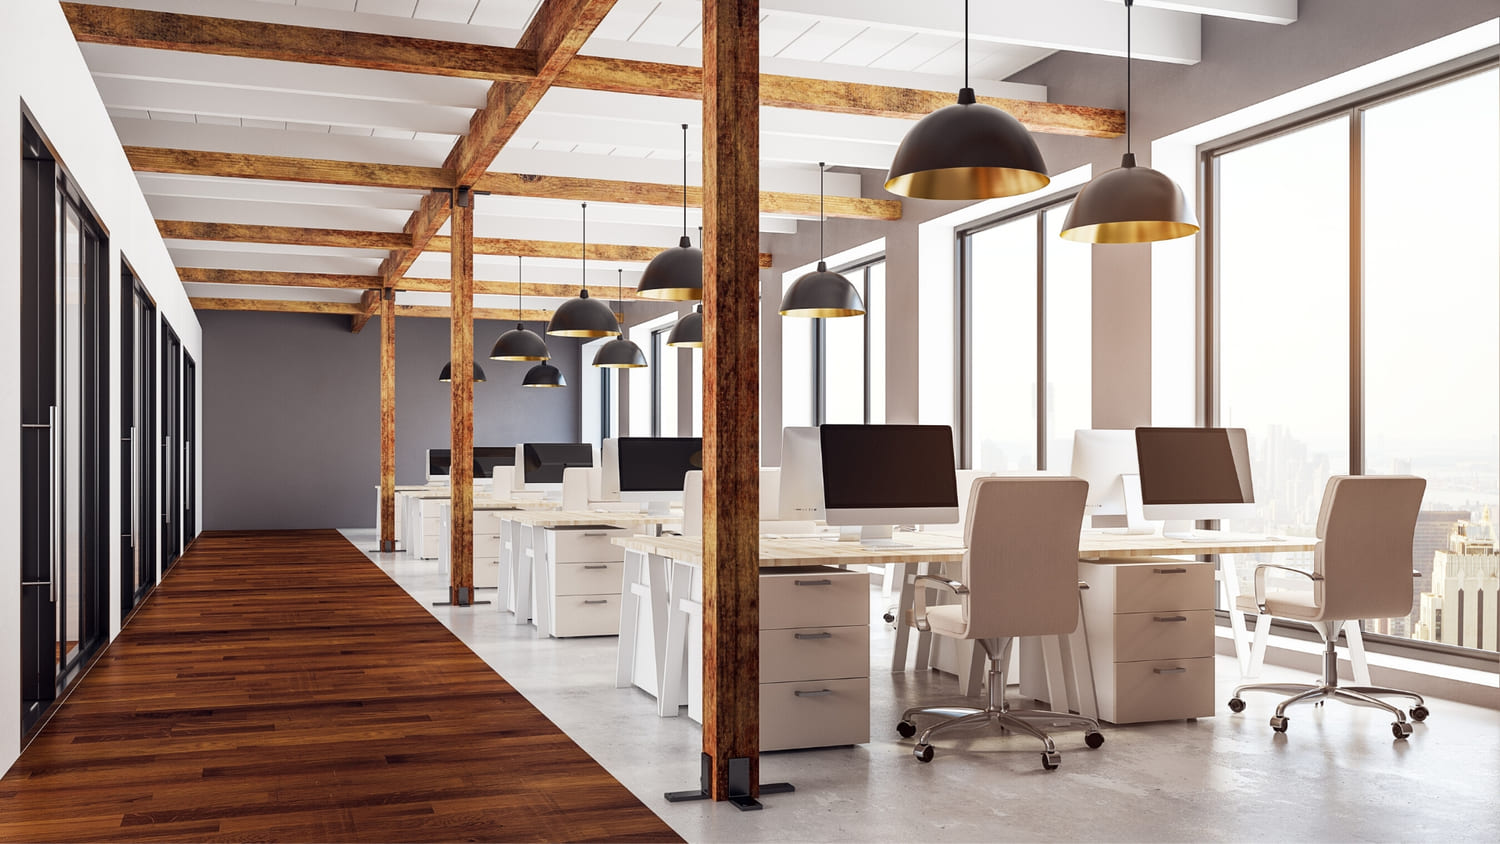 A beautiful modern office space with rich brown wood floors